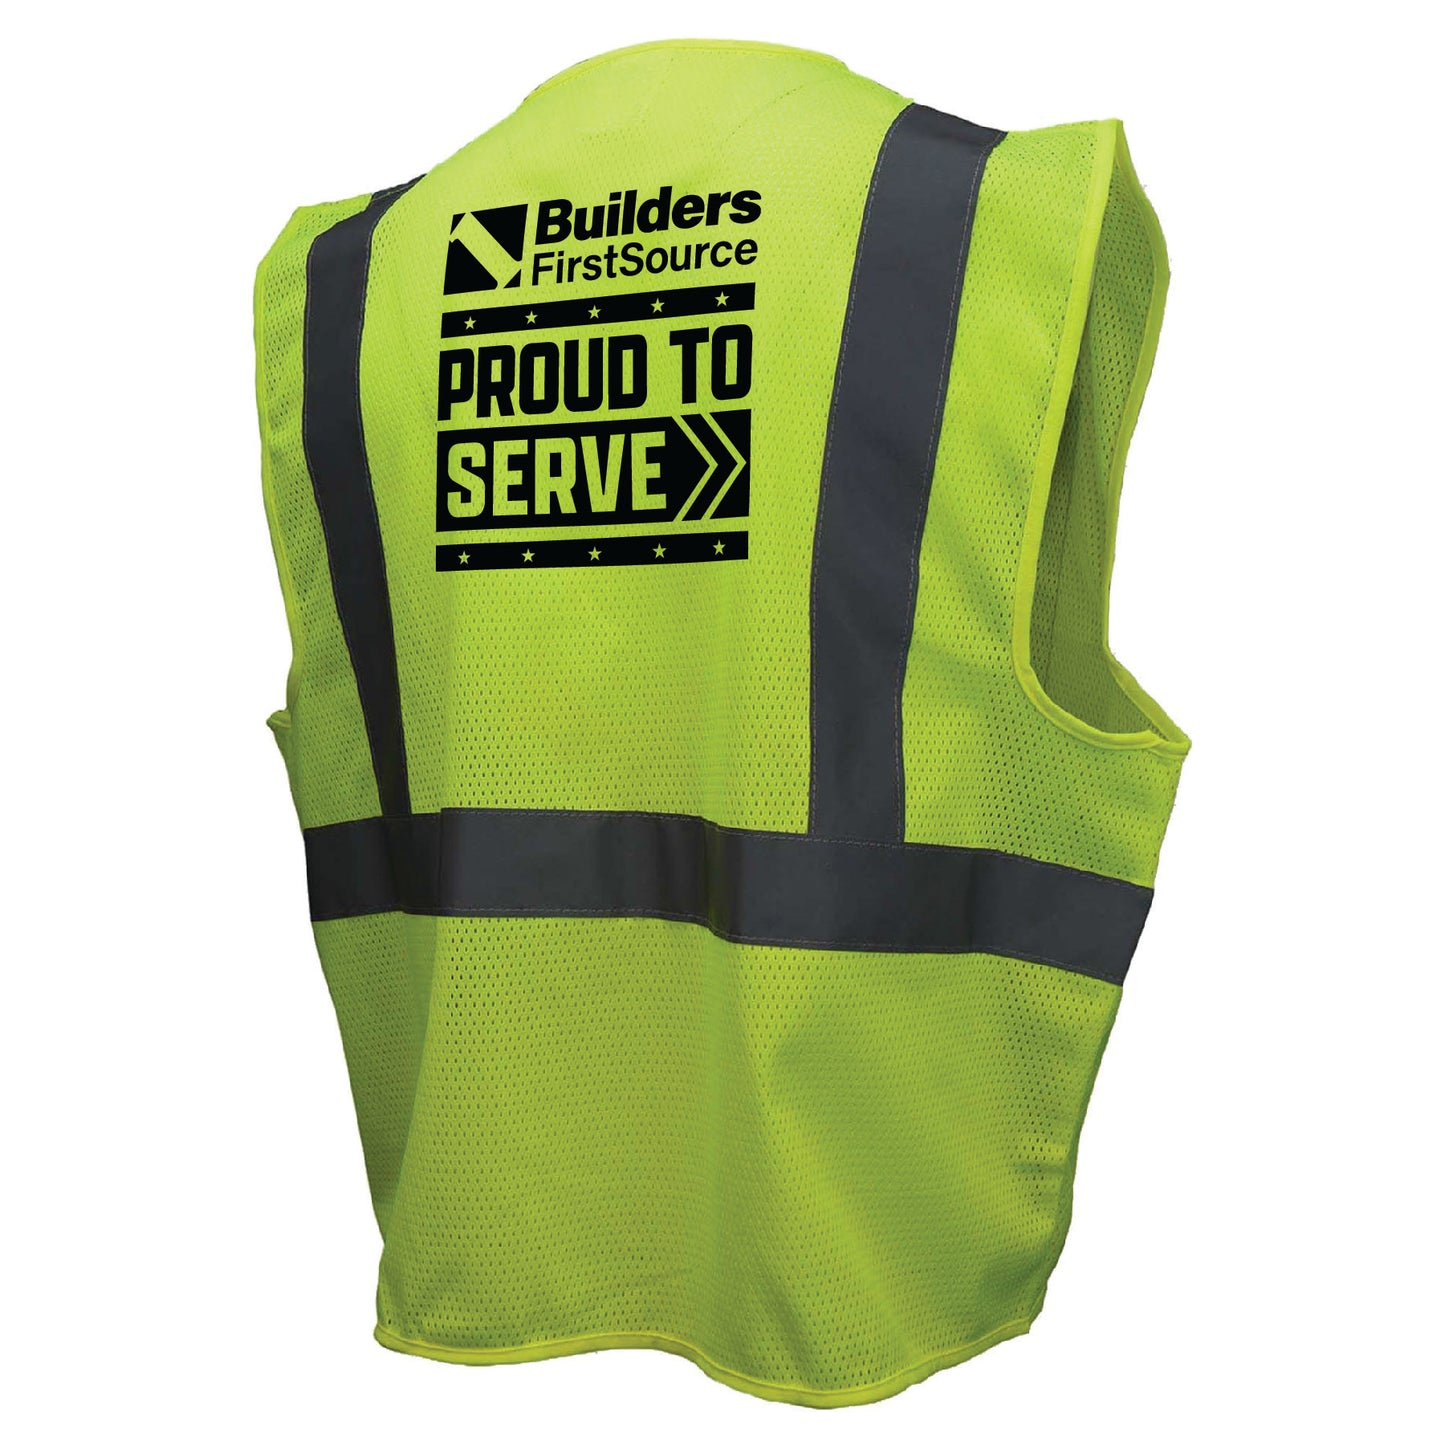 Proud to Serve Economy Mesh Safety Vest with Zipper, ANSI 2, R